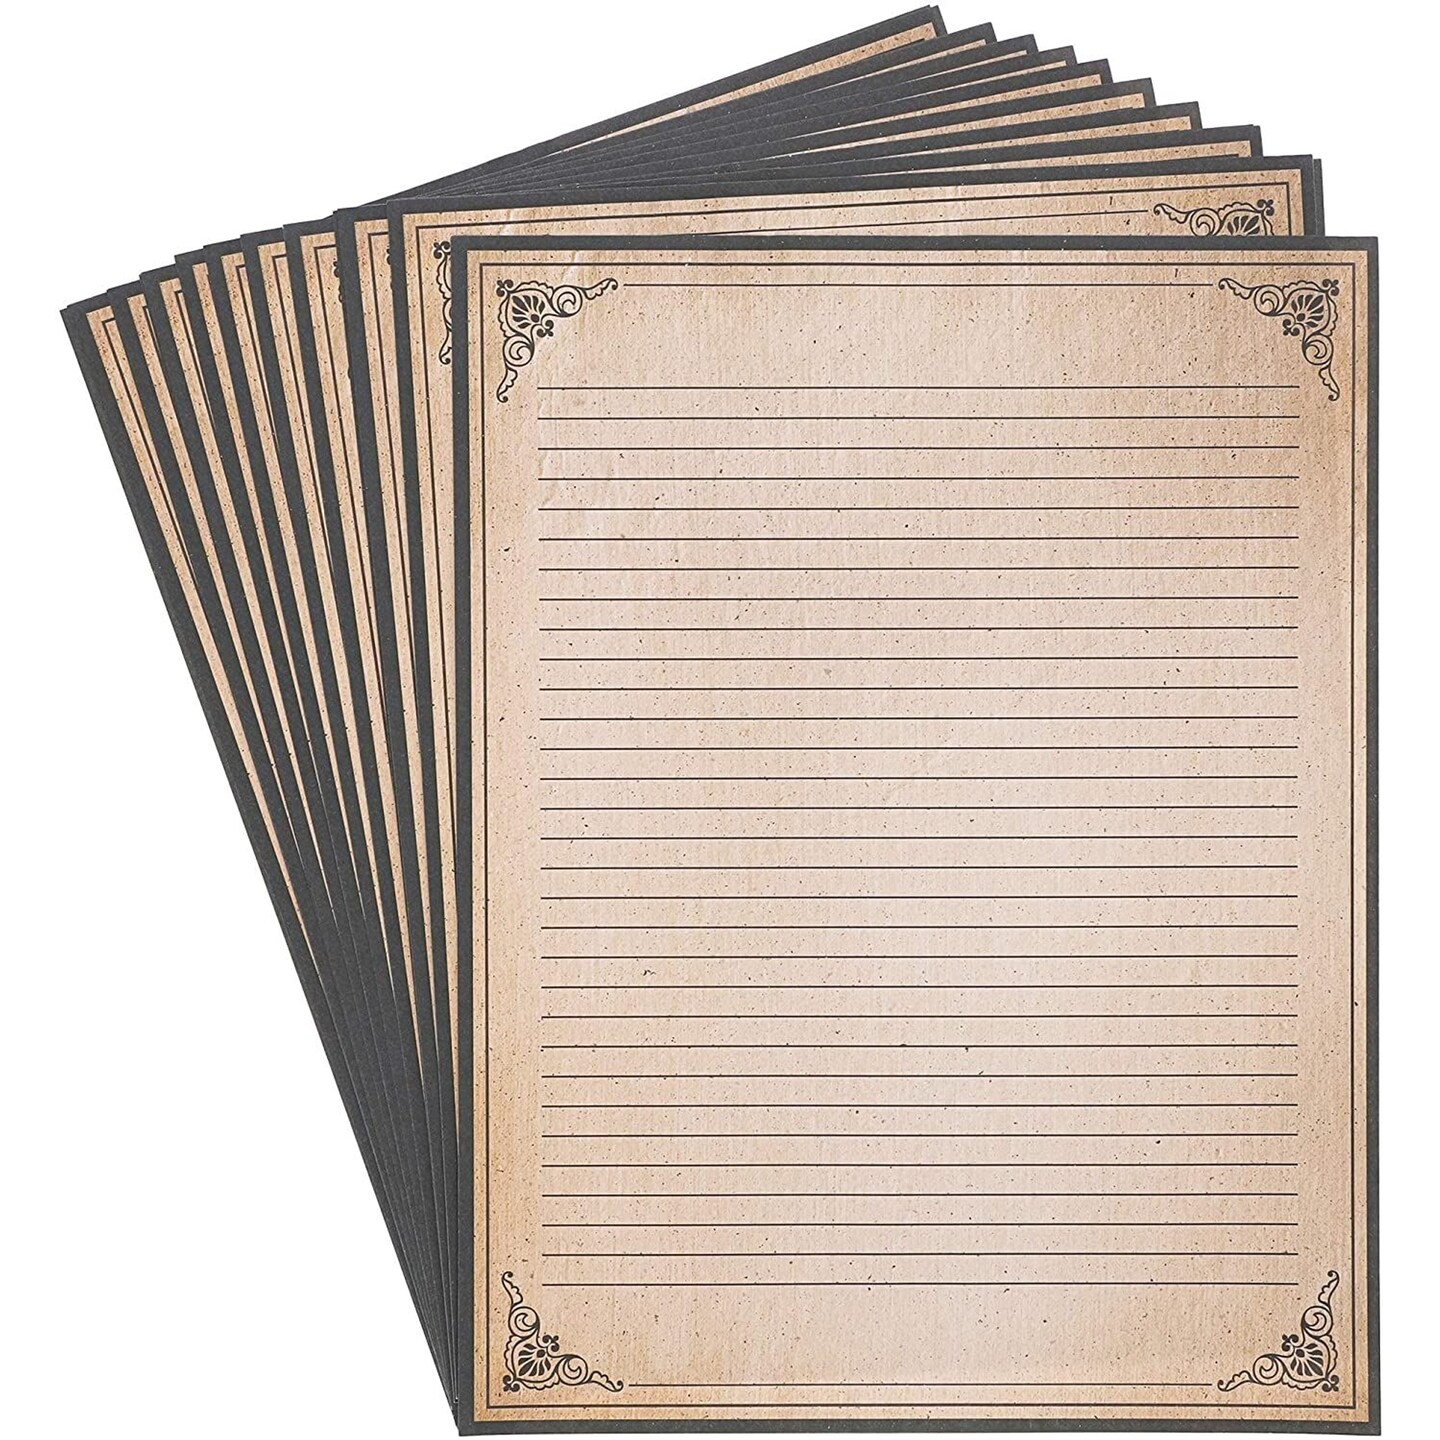 48 Sheets Vintage Lined Paper with Antique Border Design, Aged Stationery for Writing Letters, Invitations (8.5 x 11 In)